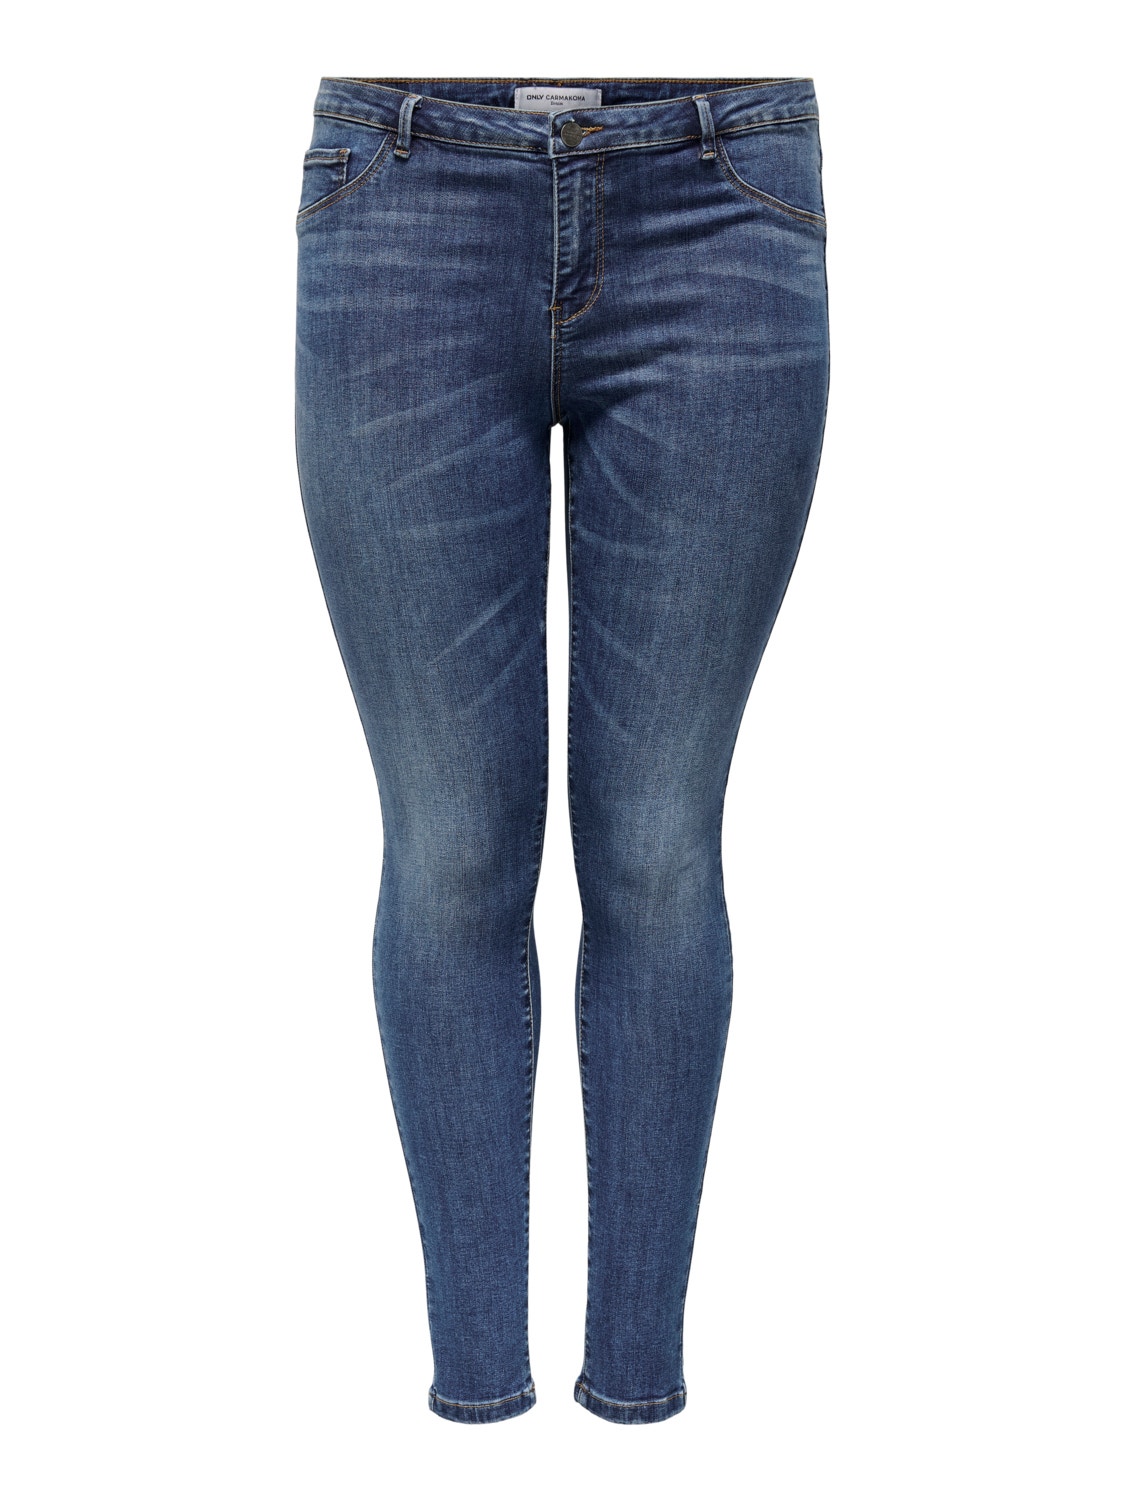 ONLY Jeans Skinny Fit Taille classique -Medium Blue Denim - 15219189